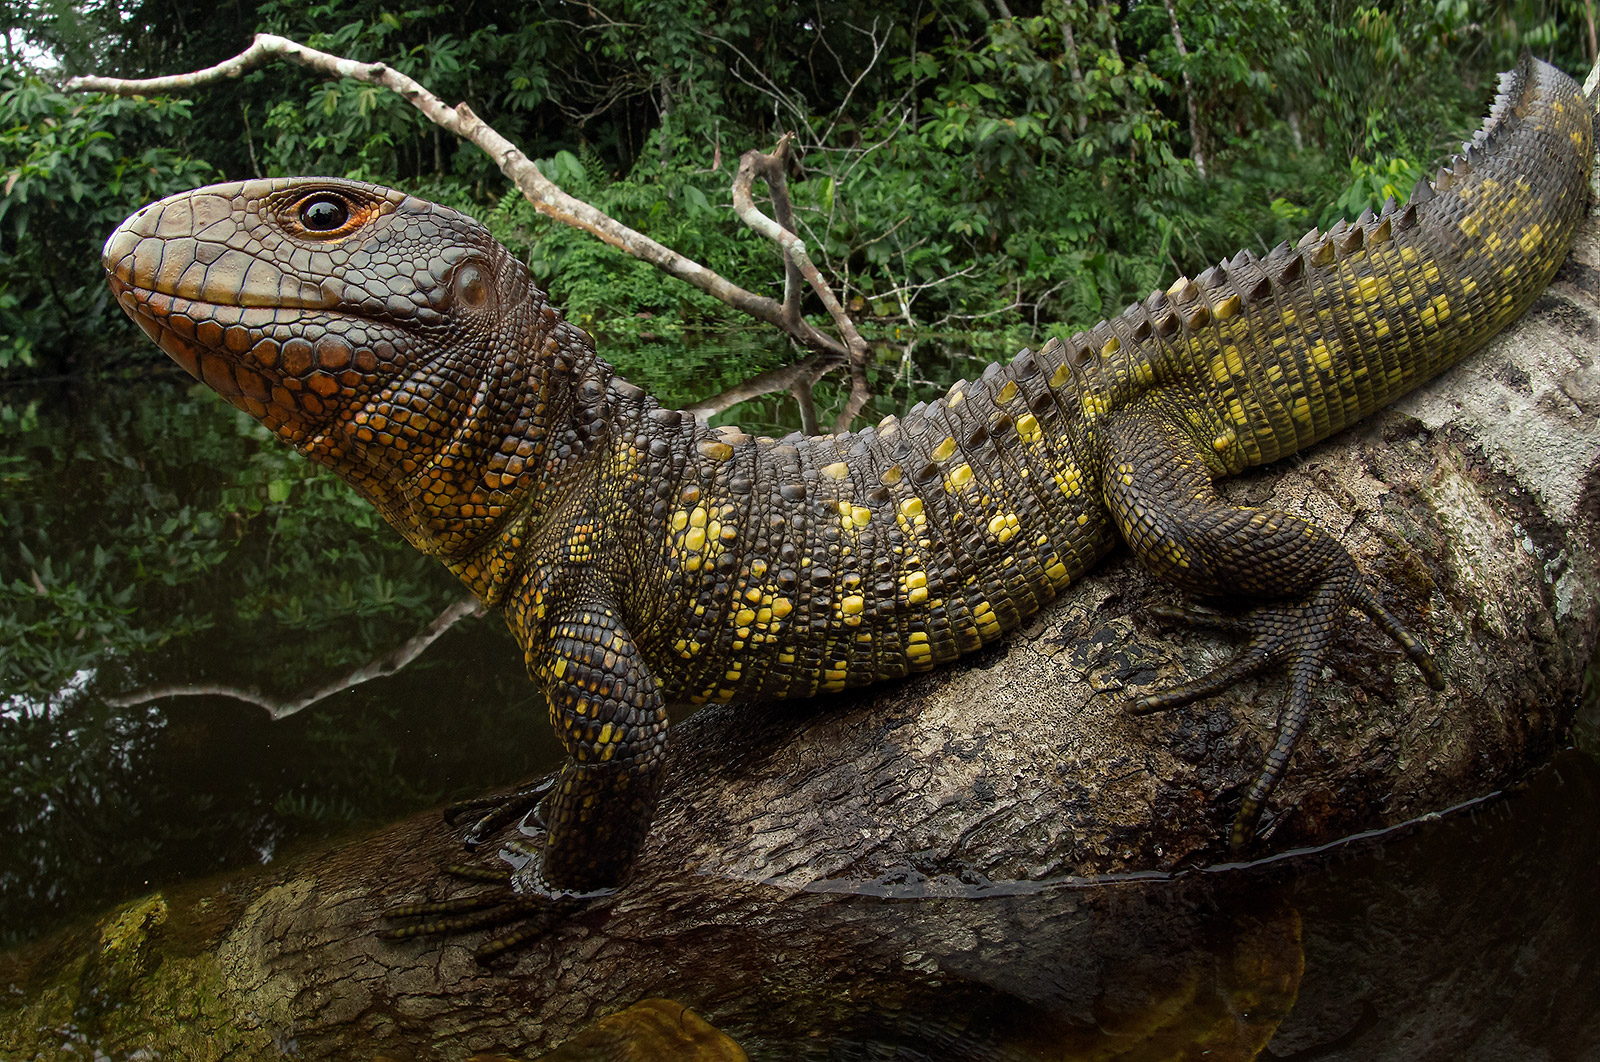 Image showing a Northern Caiman-Lizard in its flooded forest environment